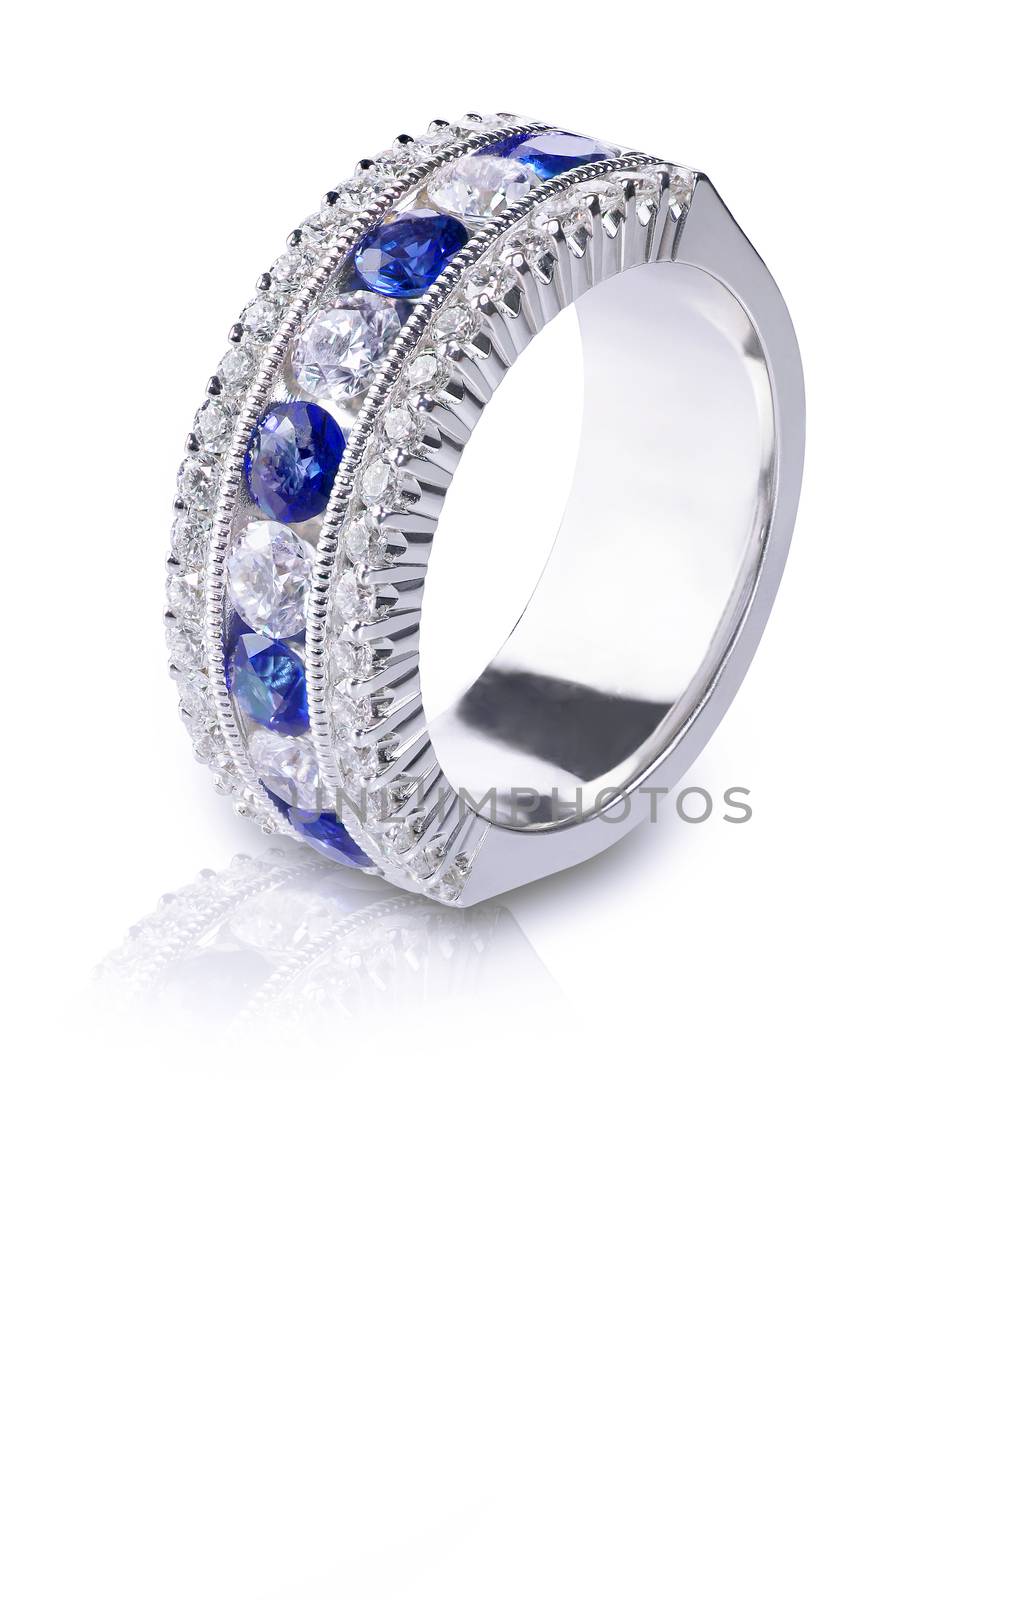 A blue Gemstone ring set in gold with diamonds. Isolated on white with a reflection.